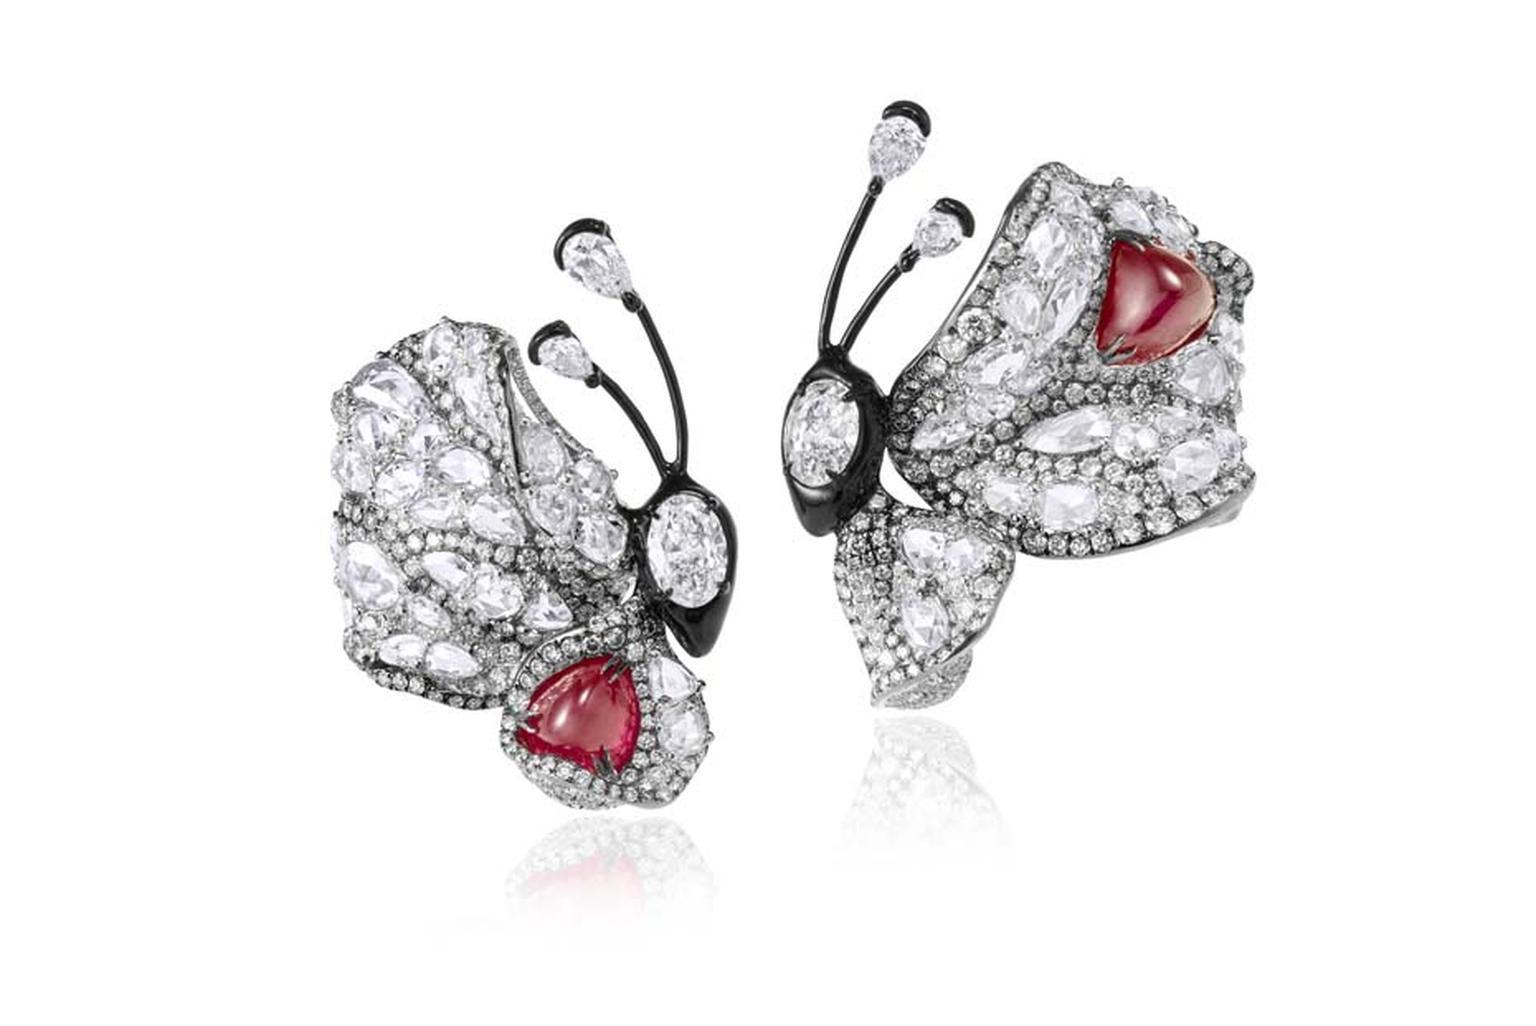 Cindy Chao Summer Butterfly ruby earrings, as worn by Olivia Munn at the 2015 Met Gala in New York.